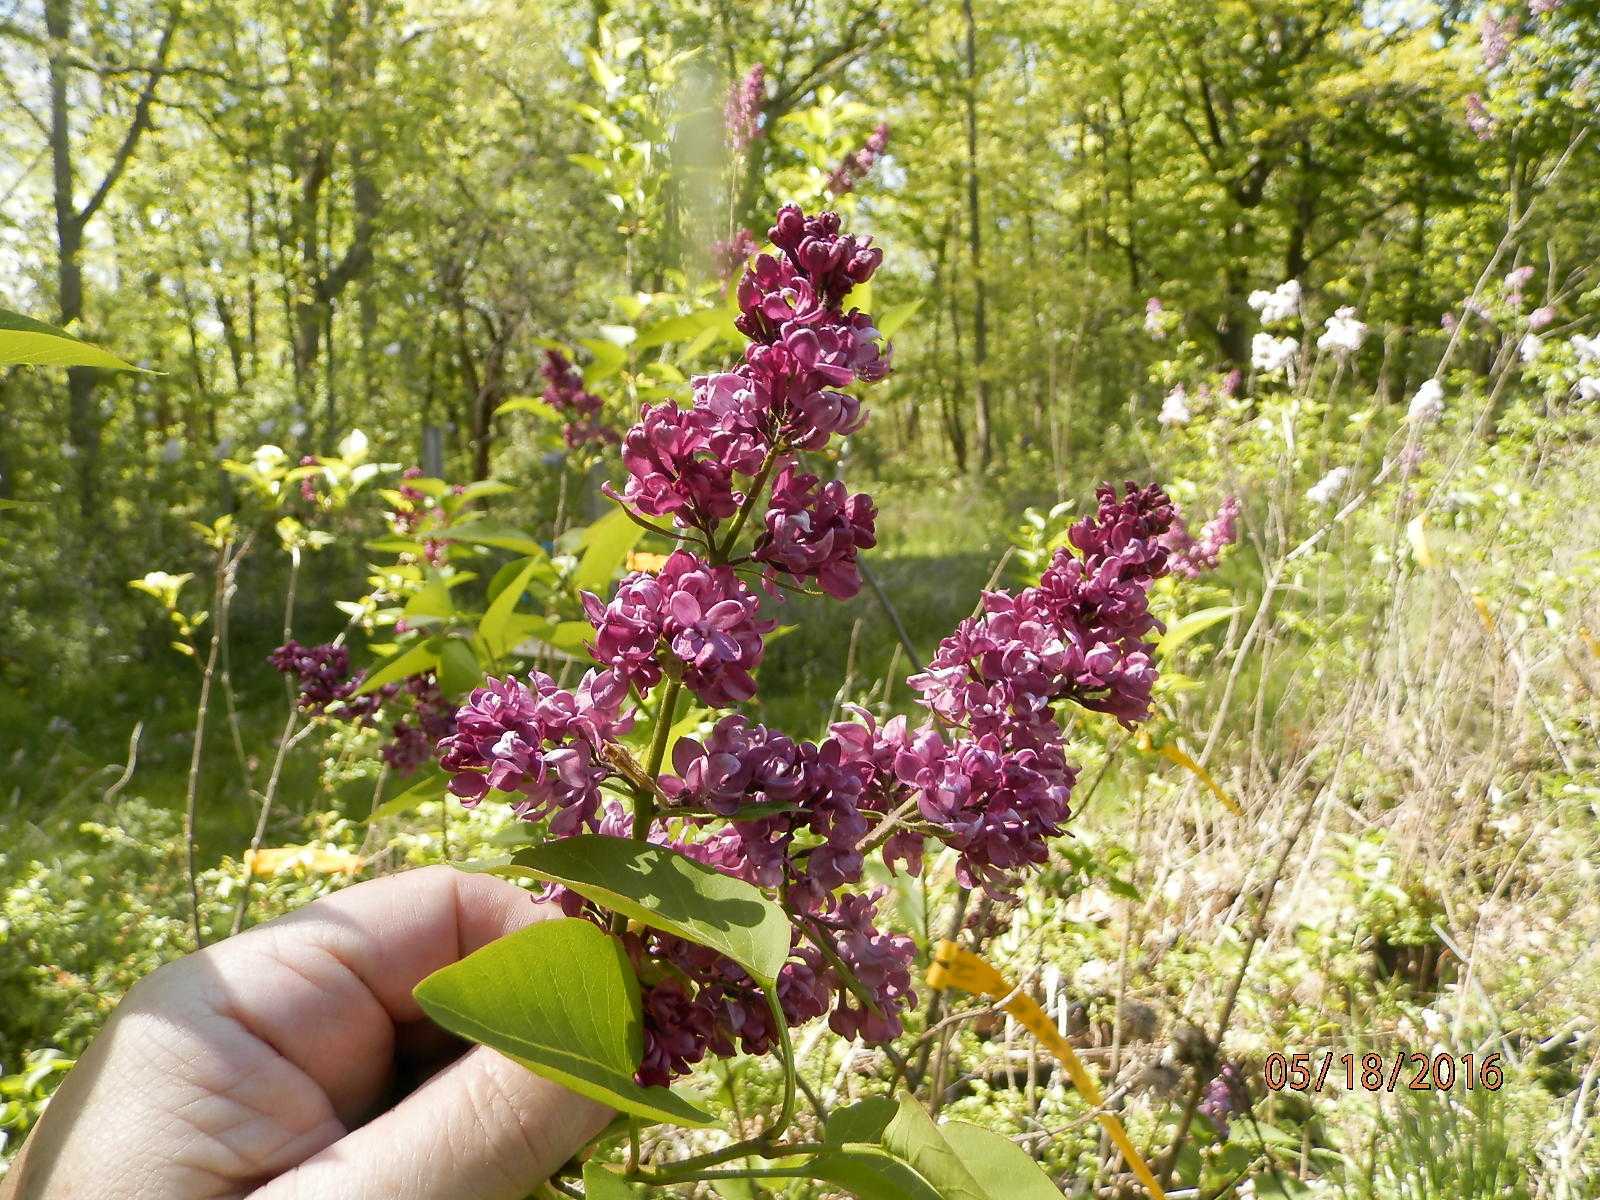 French Lilacs are Syringa vulgaris common Lilacs with double flowers